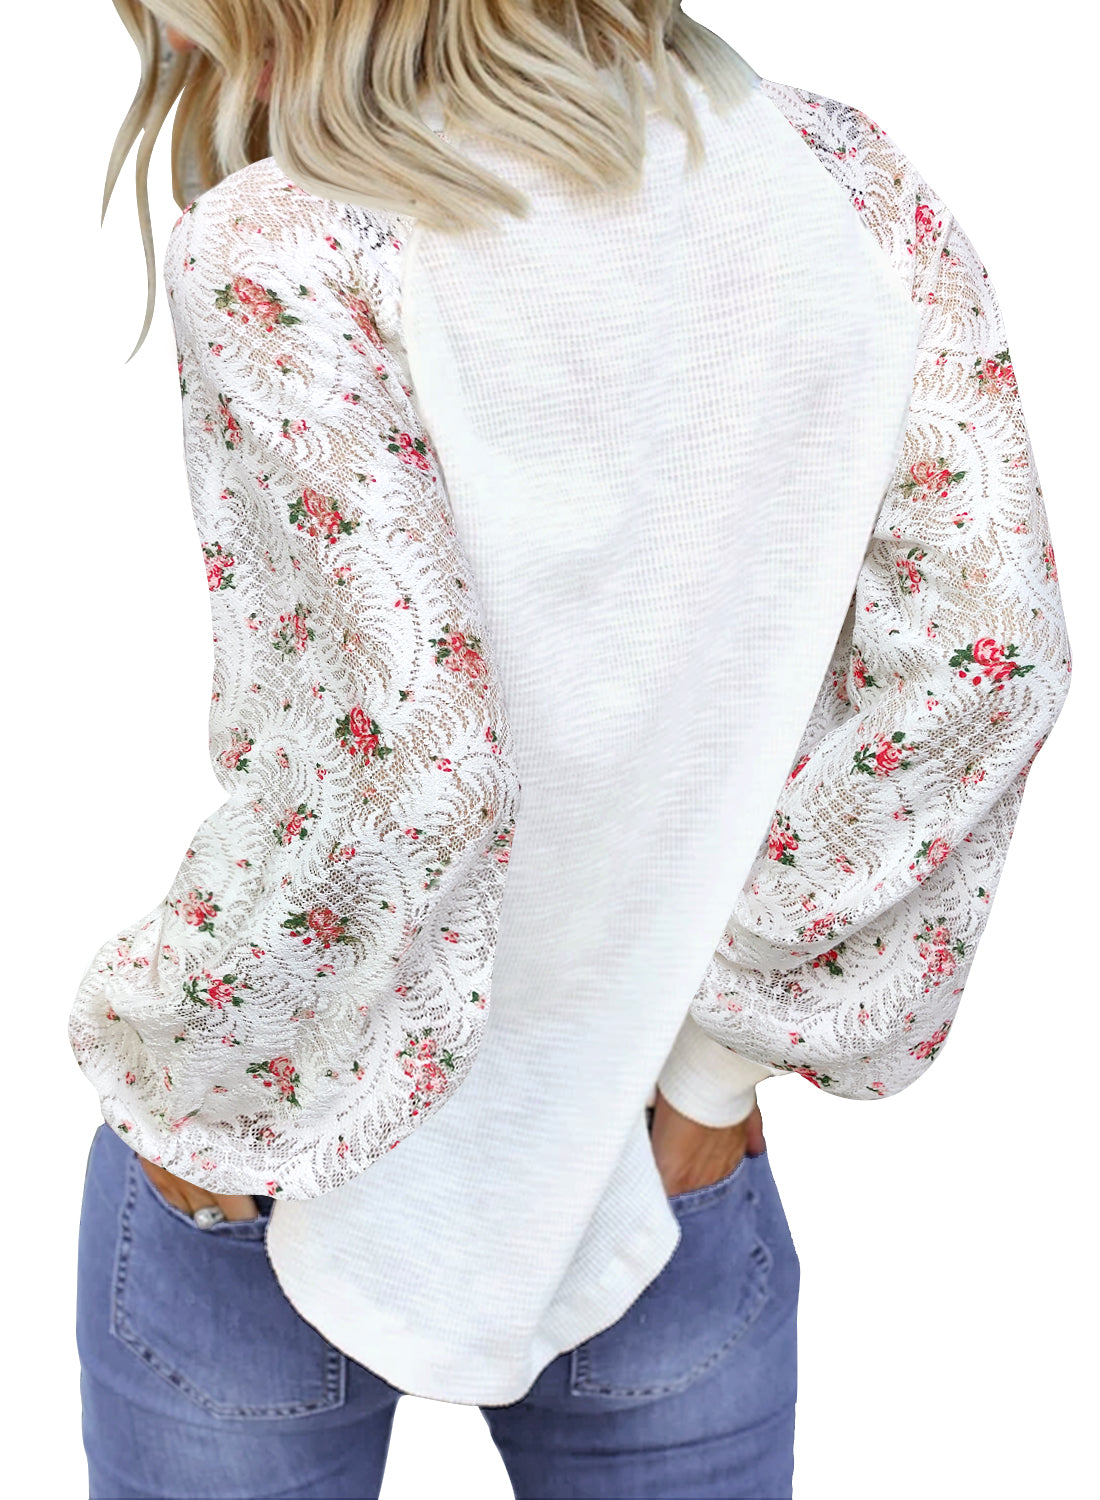 MIHOLL Womens Lace Long Sleeve Tops Floral Print Casual Shirts Blouses